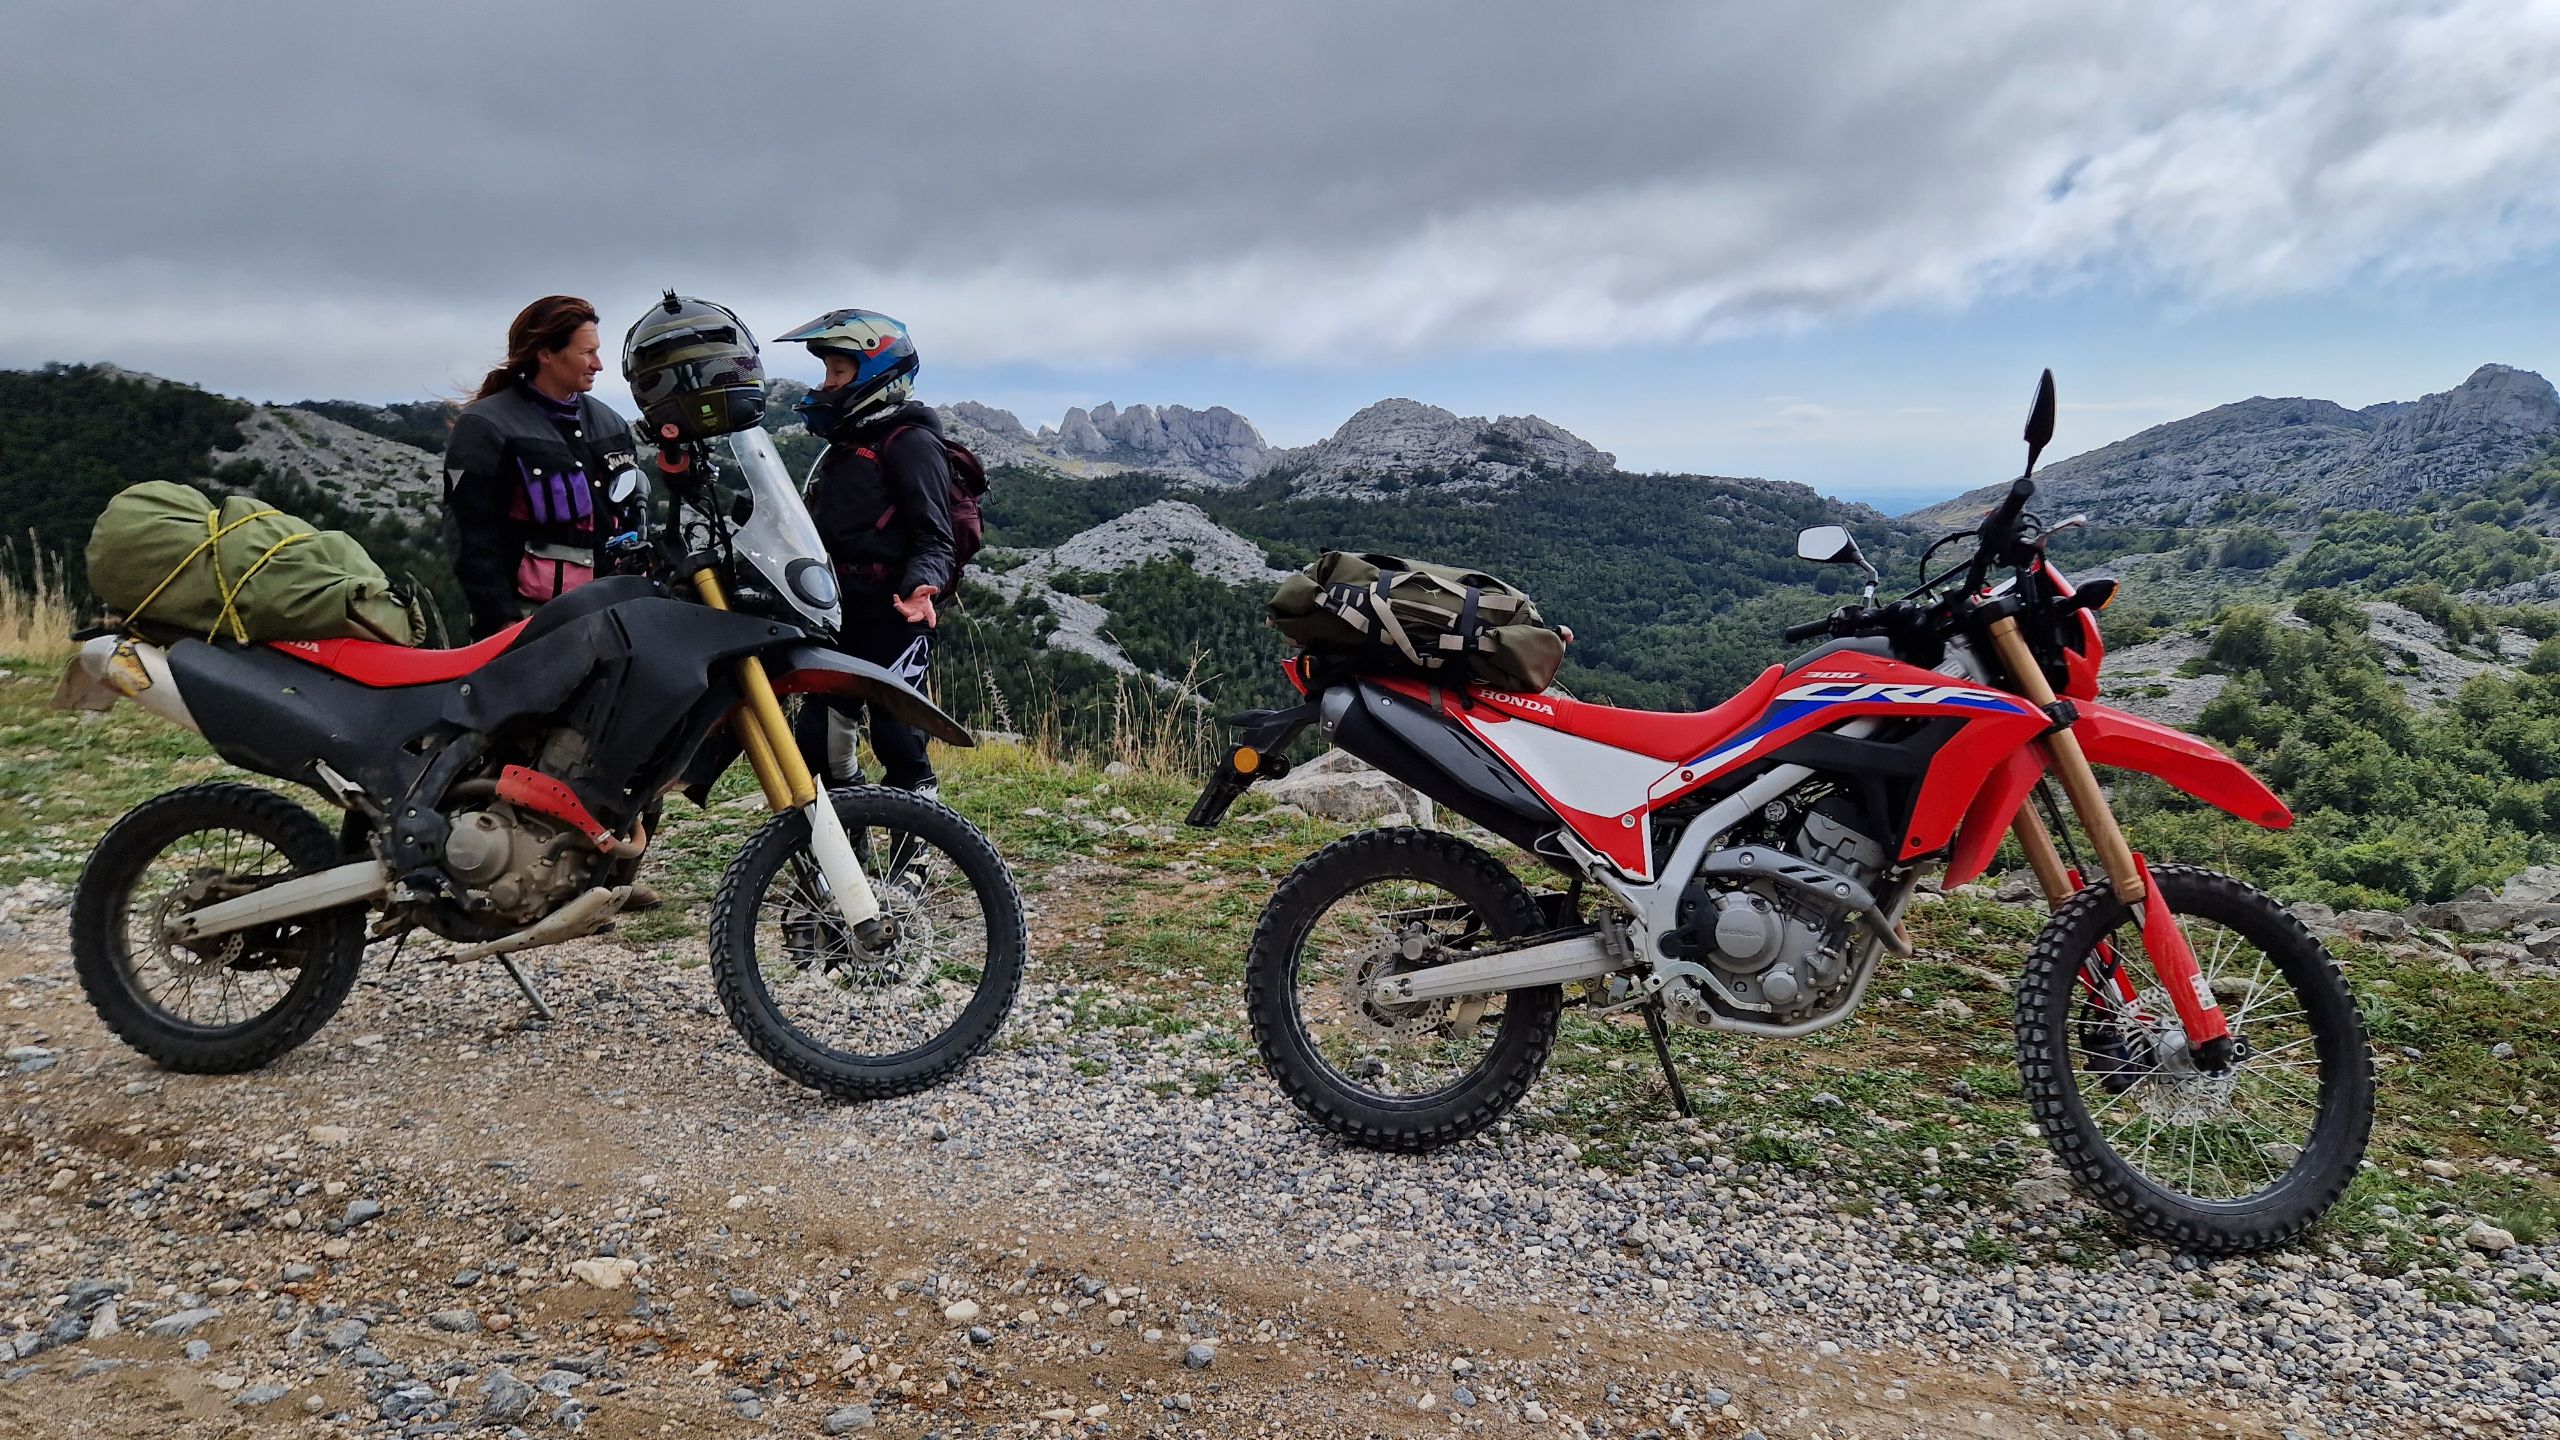 Funmoto ADVentures sightseeing 4 day only womens motorcycle tour in Croatia Velebit pit stop